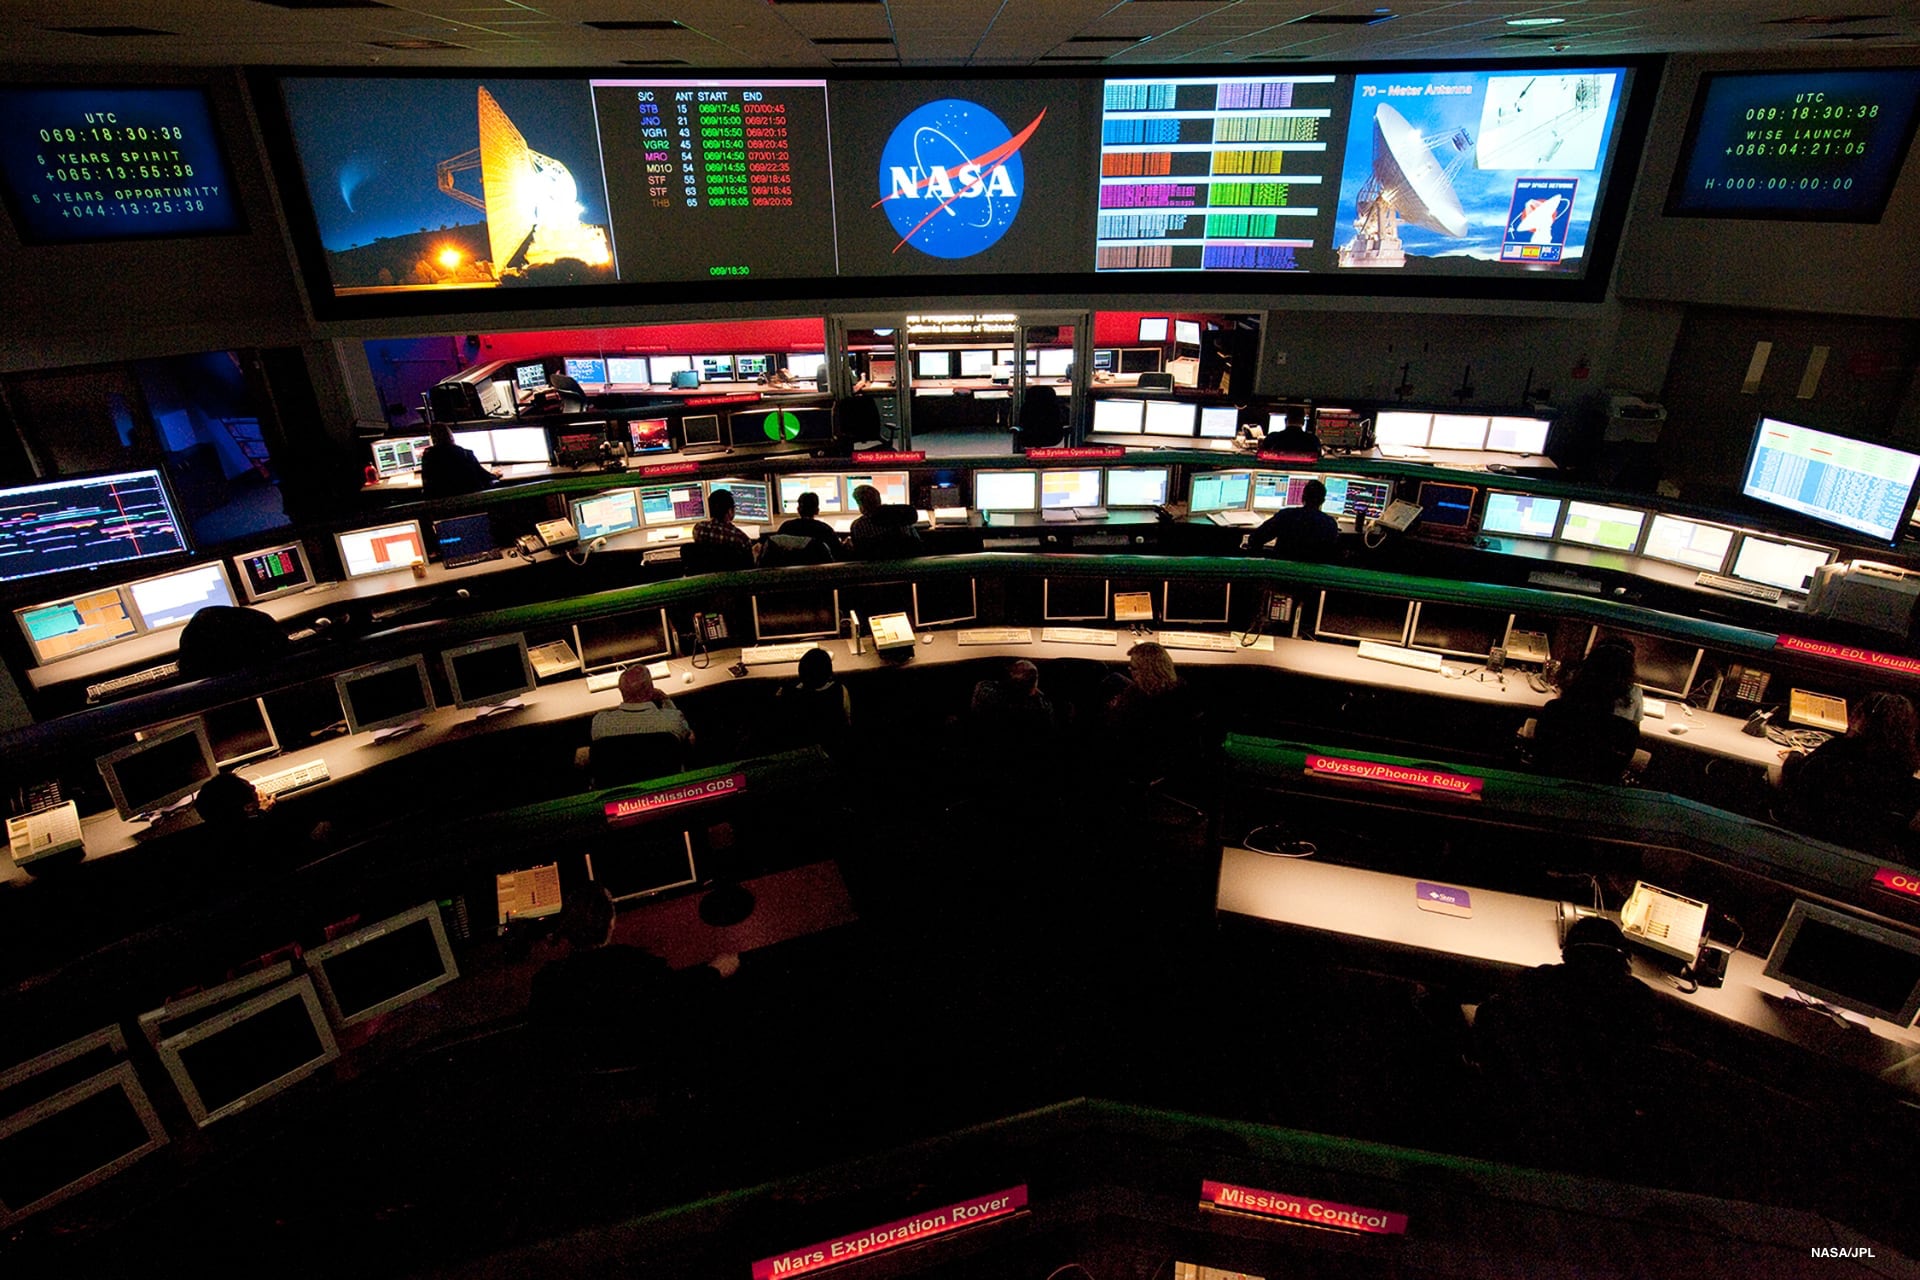 Space Flight Operations Facility’s Mission Control room